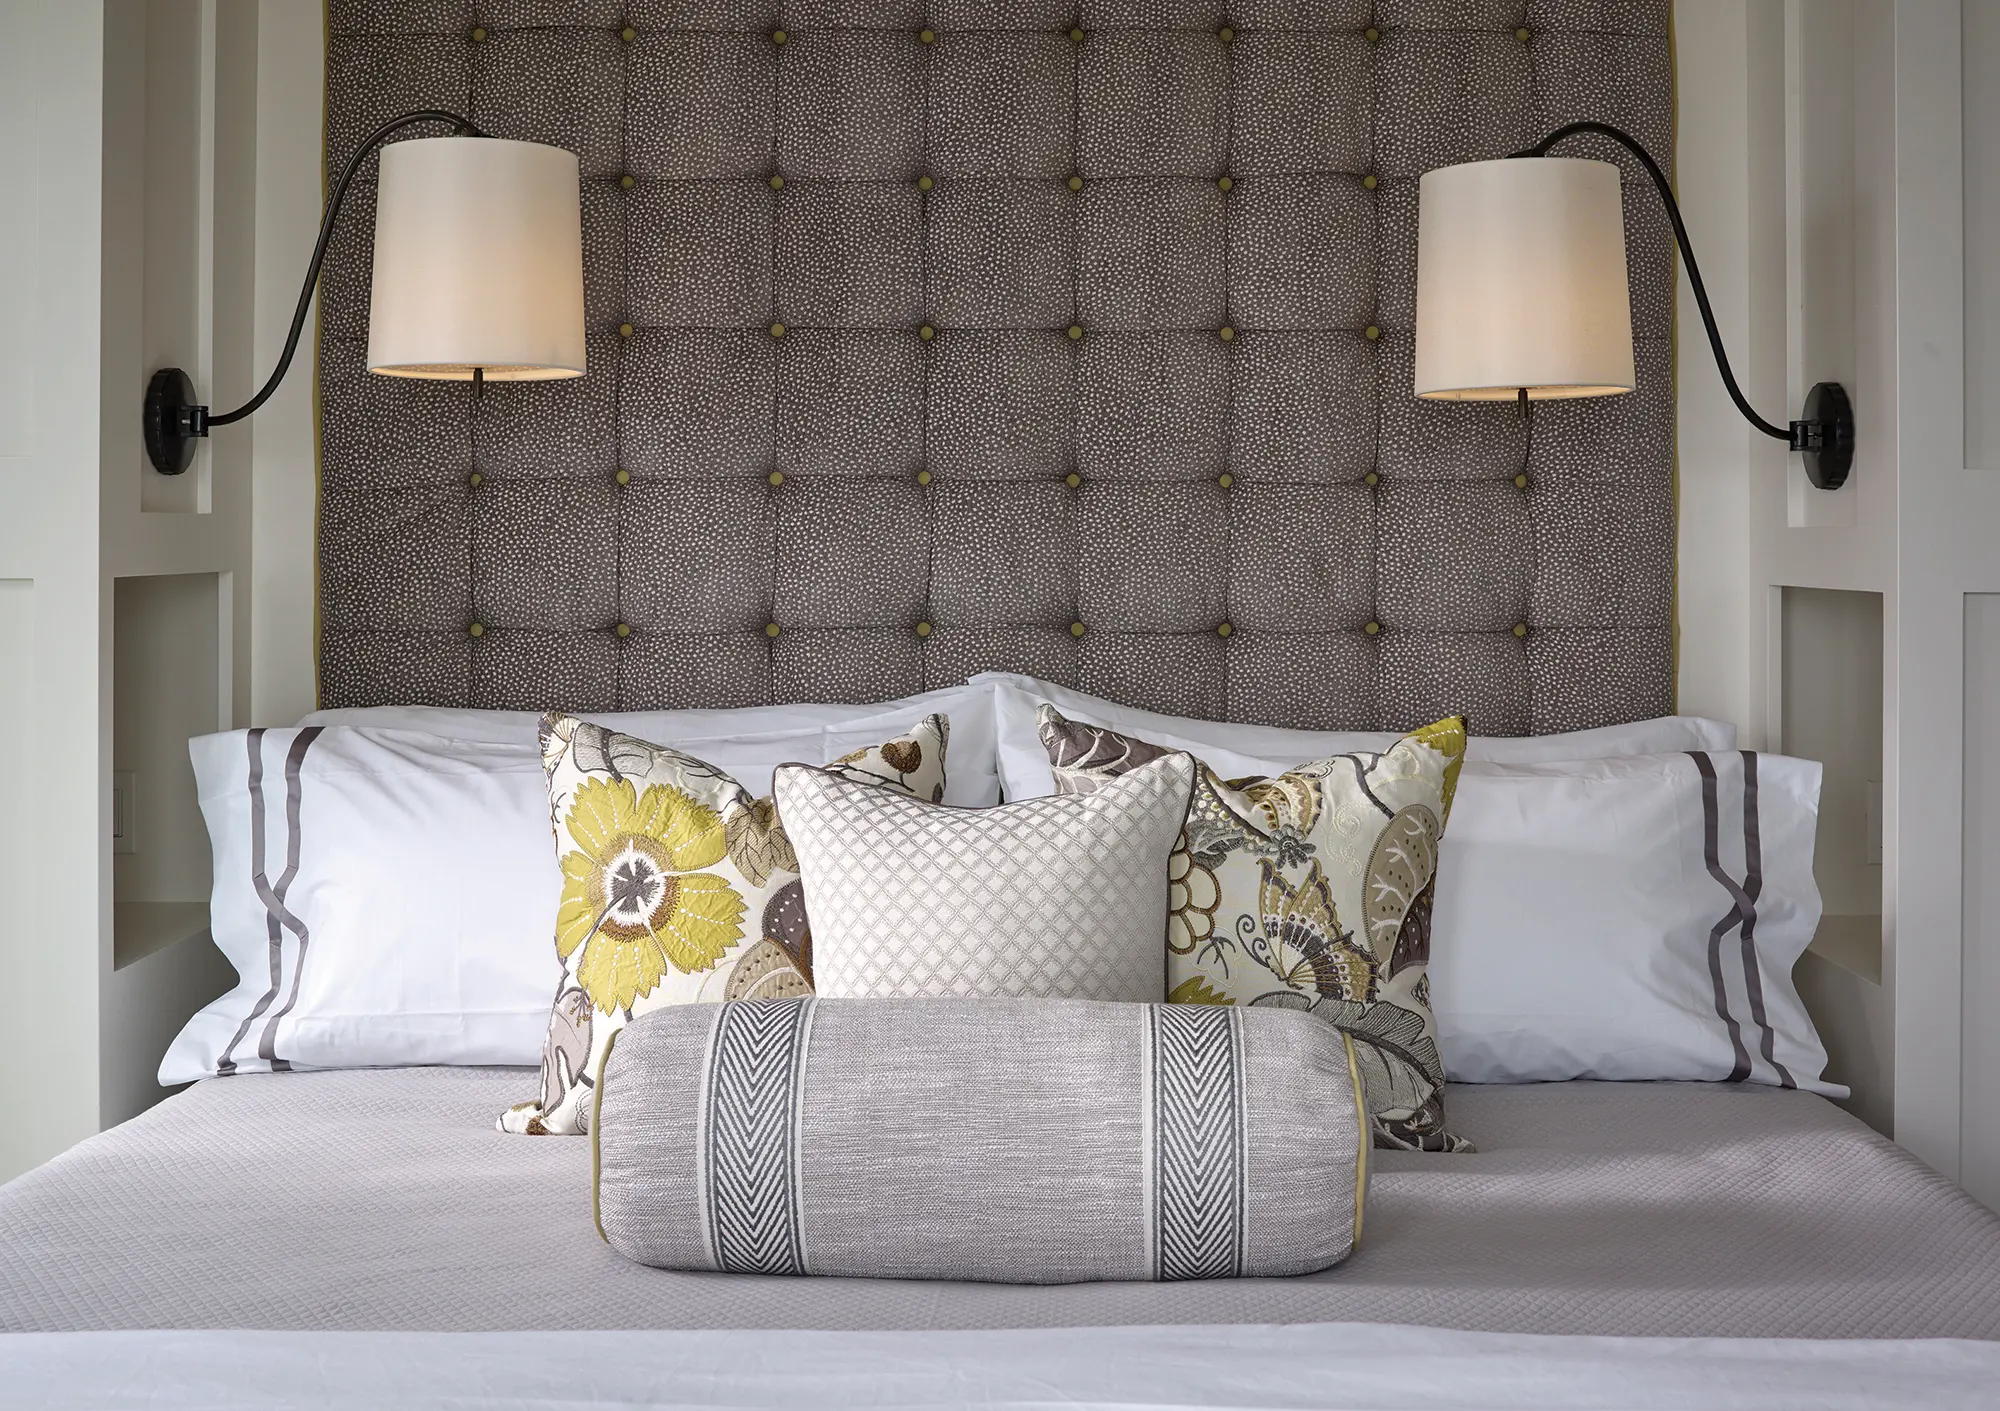 Padded headboard with built in shelves and sconces